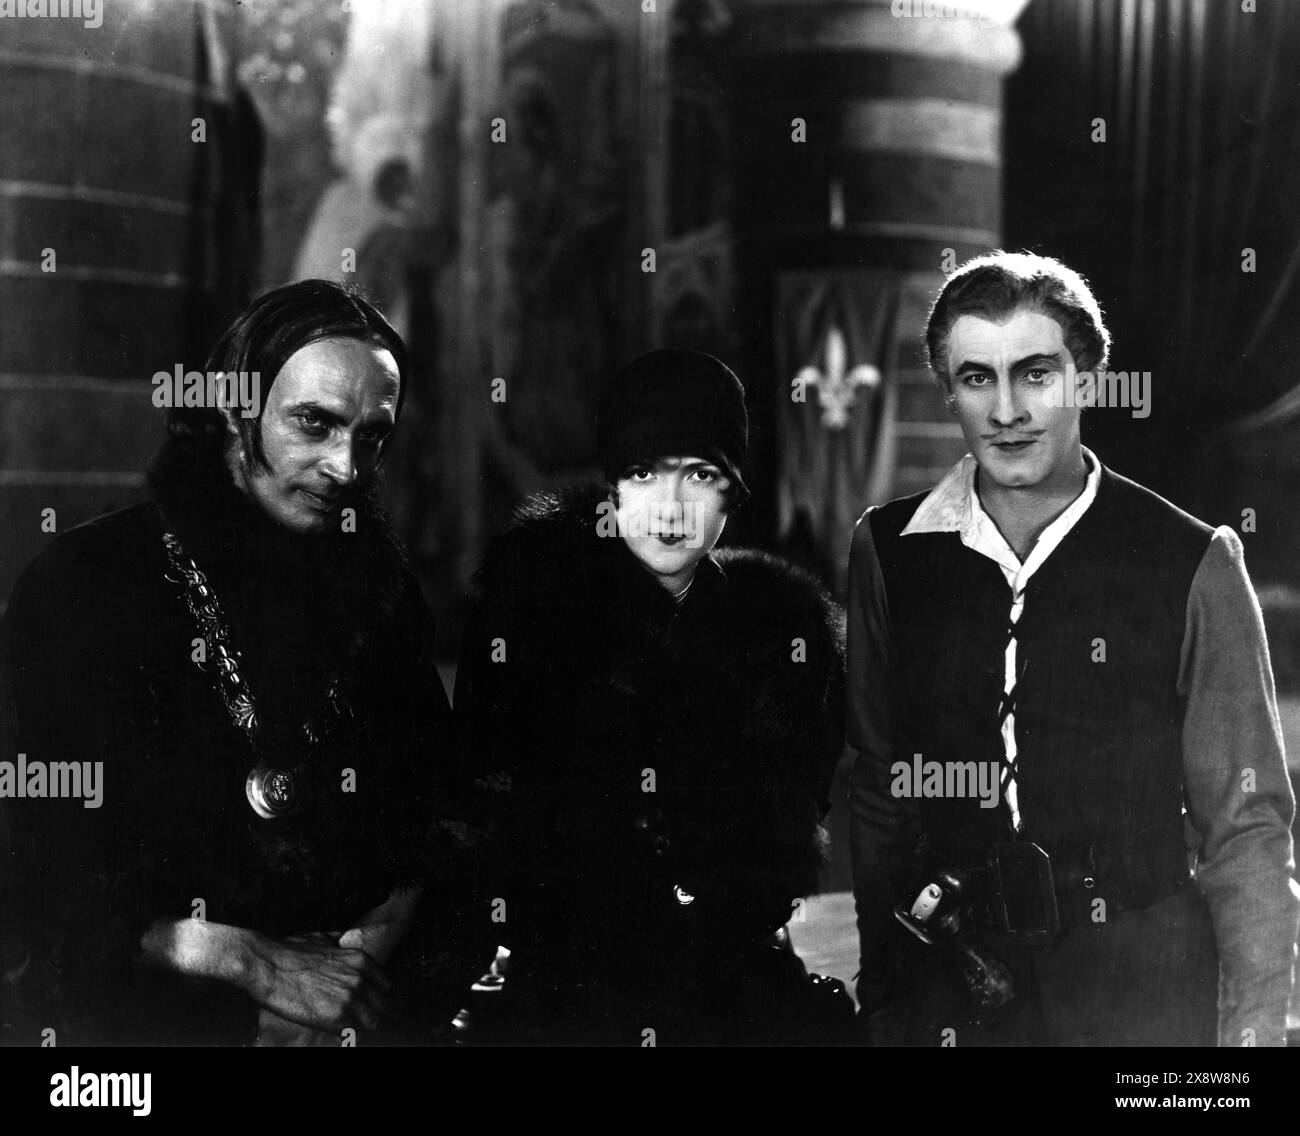 CONSTANCE TALMADGE visits CONRAD VEIDT and JOHN BARRYMORE on the set of THE BELOVED ROGUE 1927 Director ALAN CROSLAND Art Direction WILLIAM CAMERON MENZIES  United Artists Stock Photo